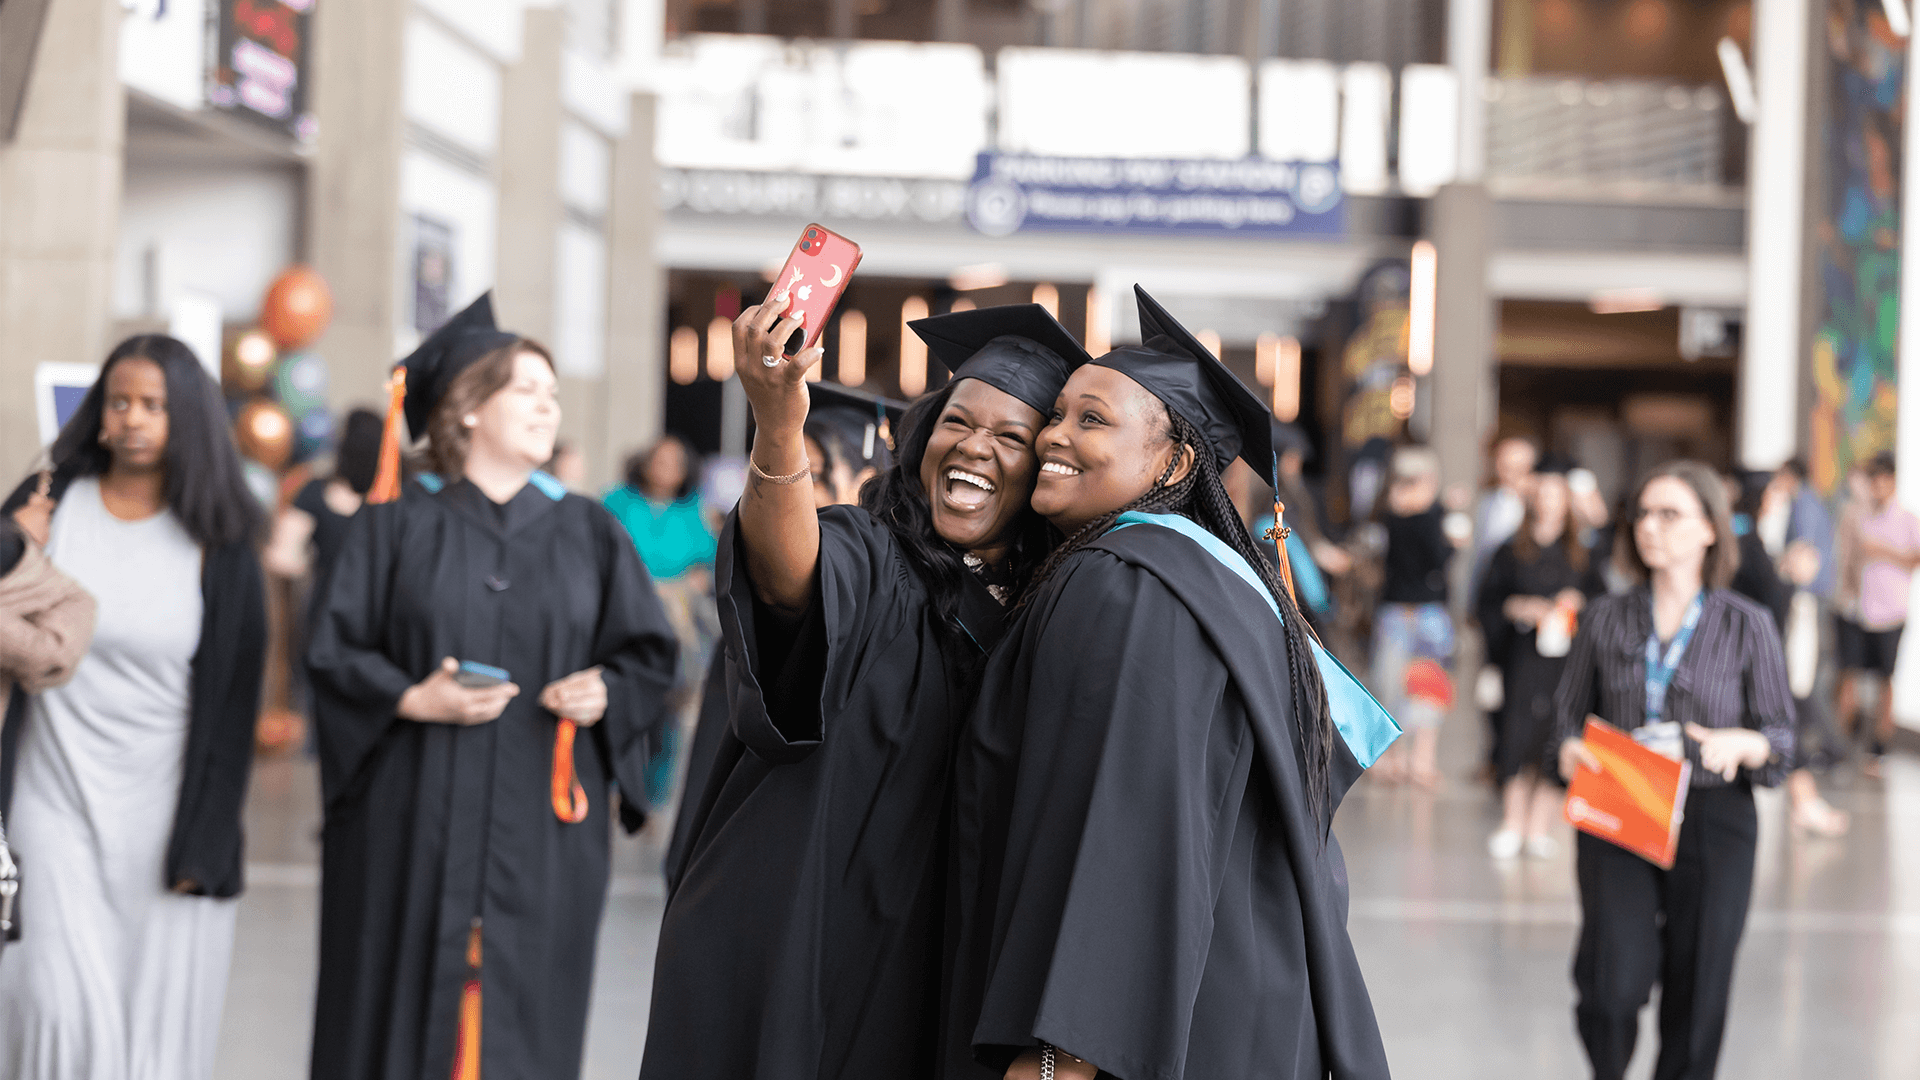 Two AU graduates taking a selfie and smiling